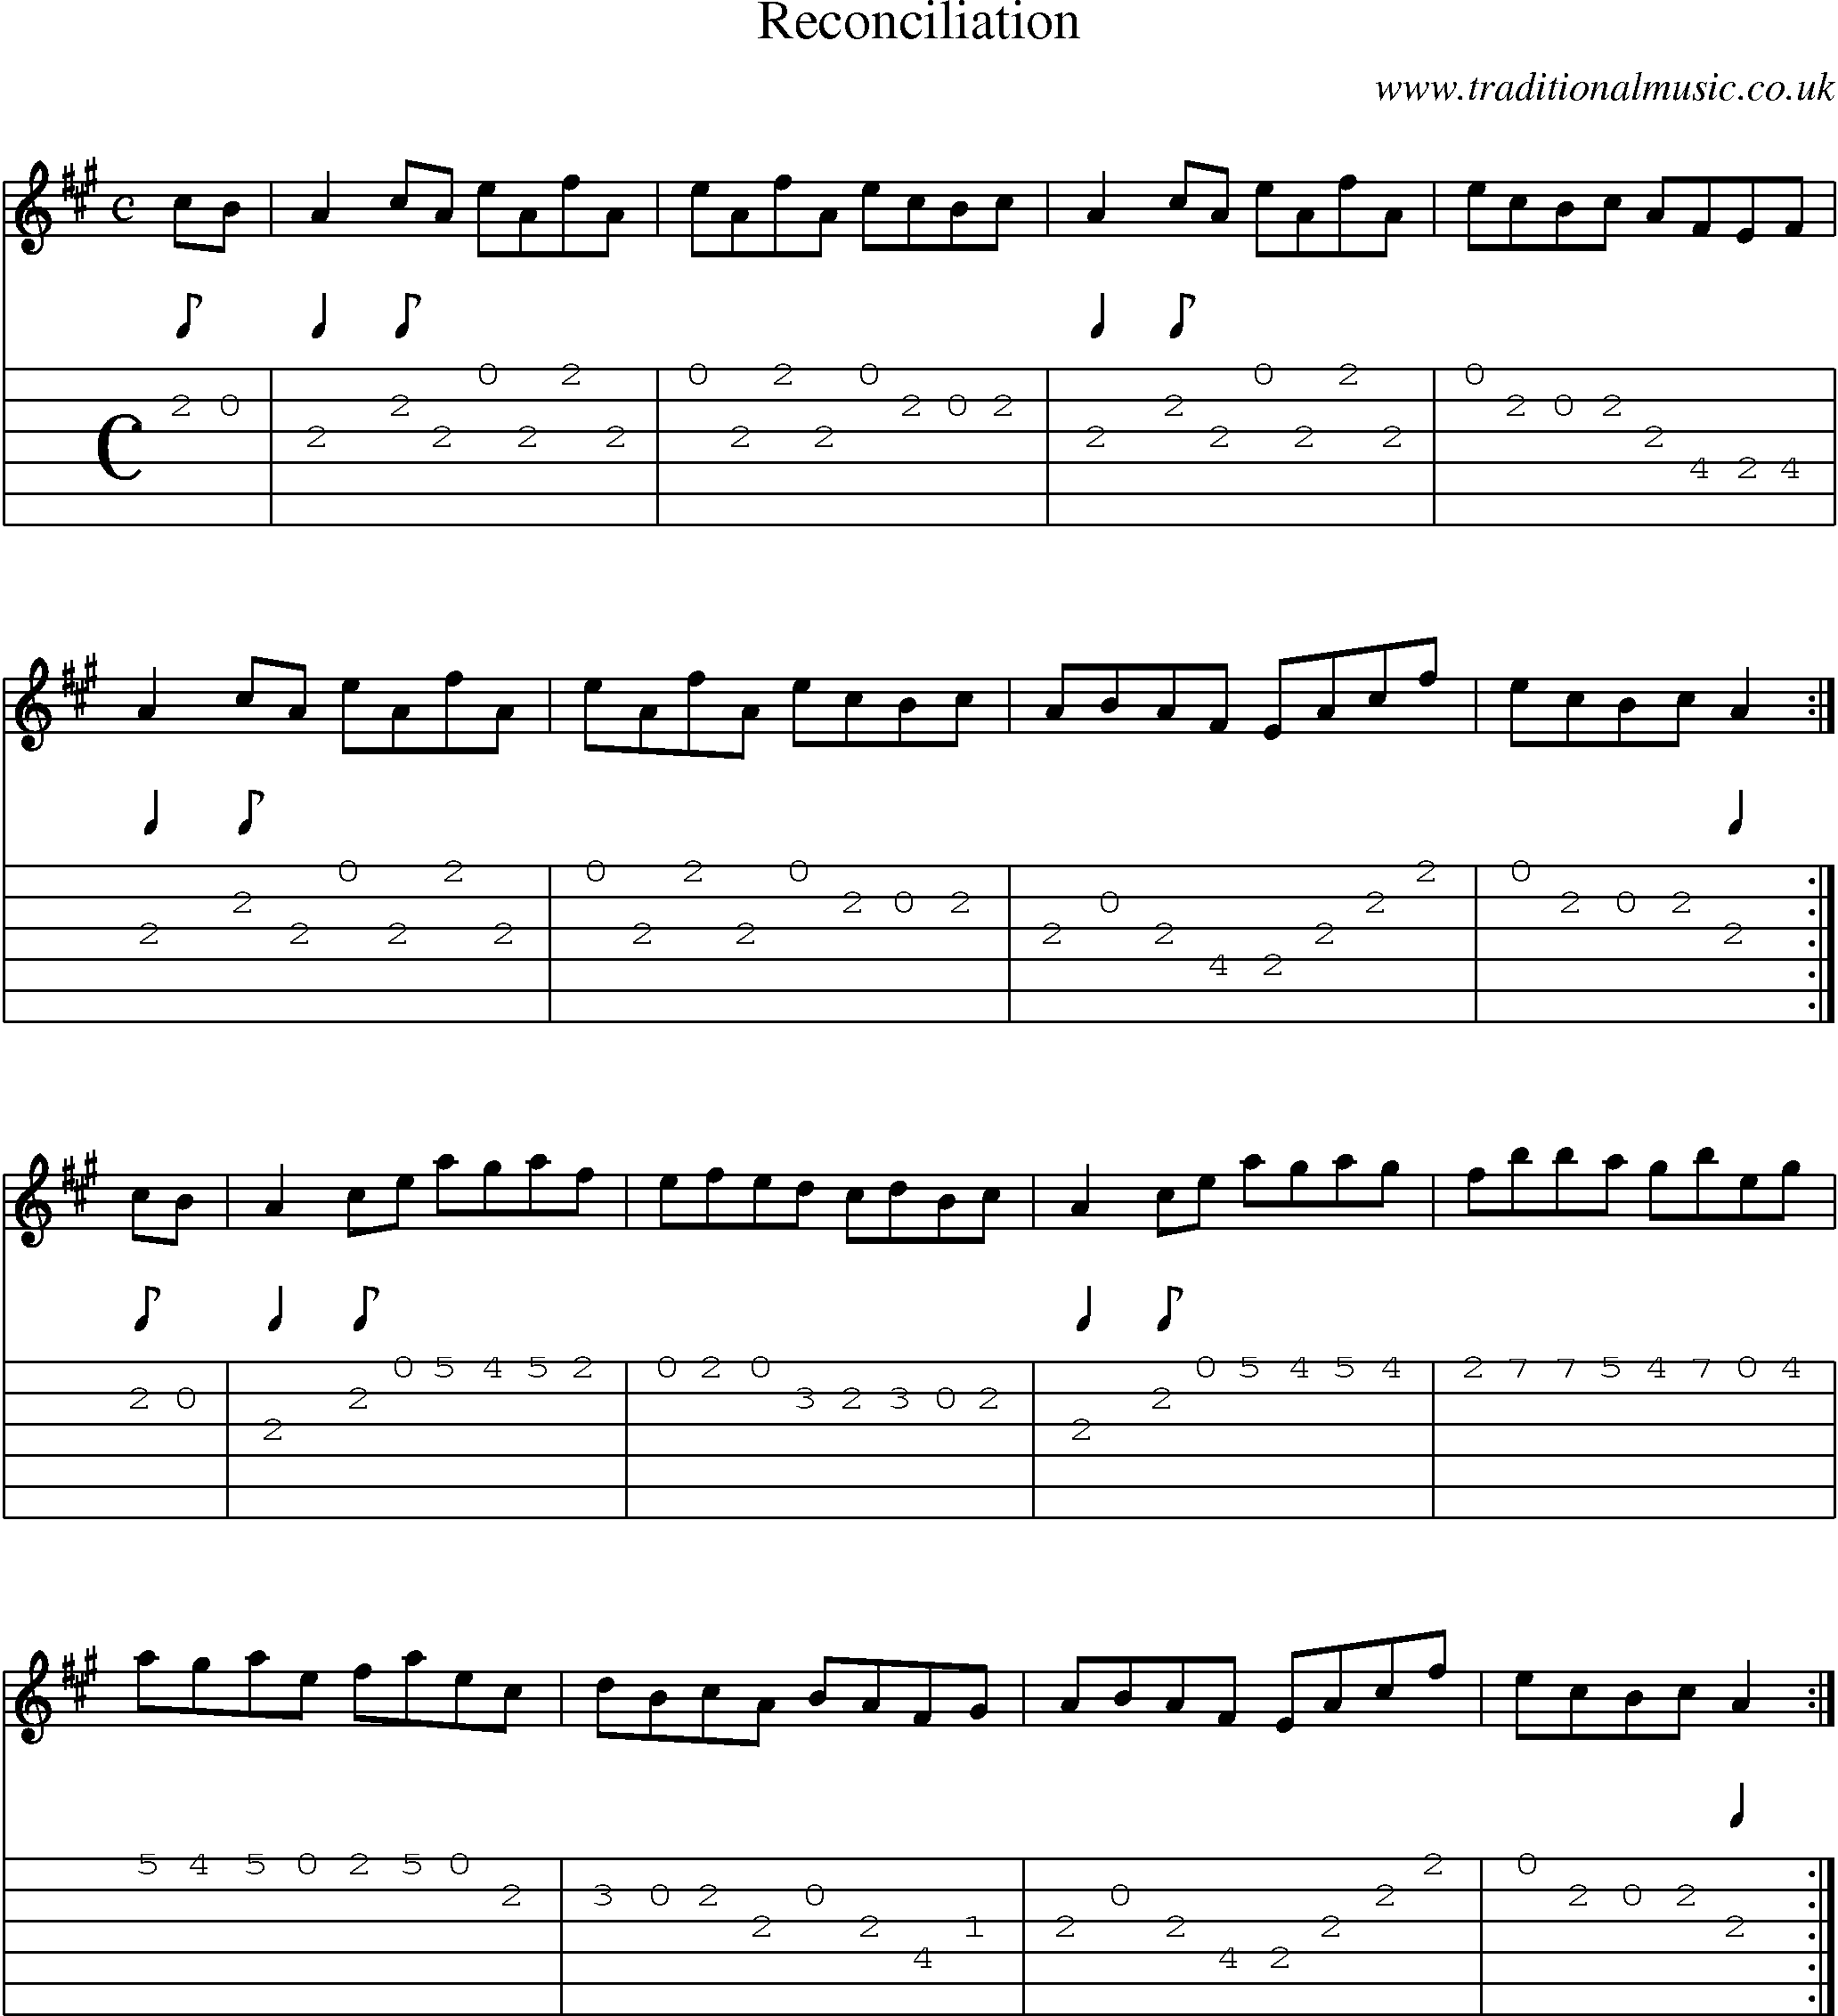 Music Score and Guitar Tabs for Reconciliation